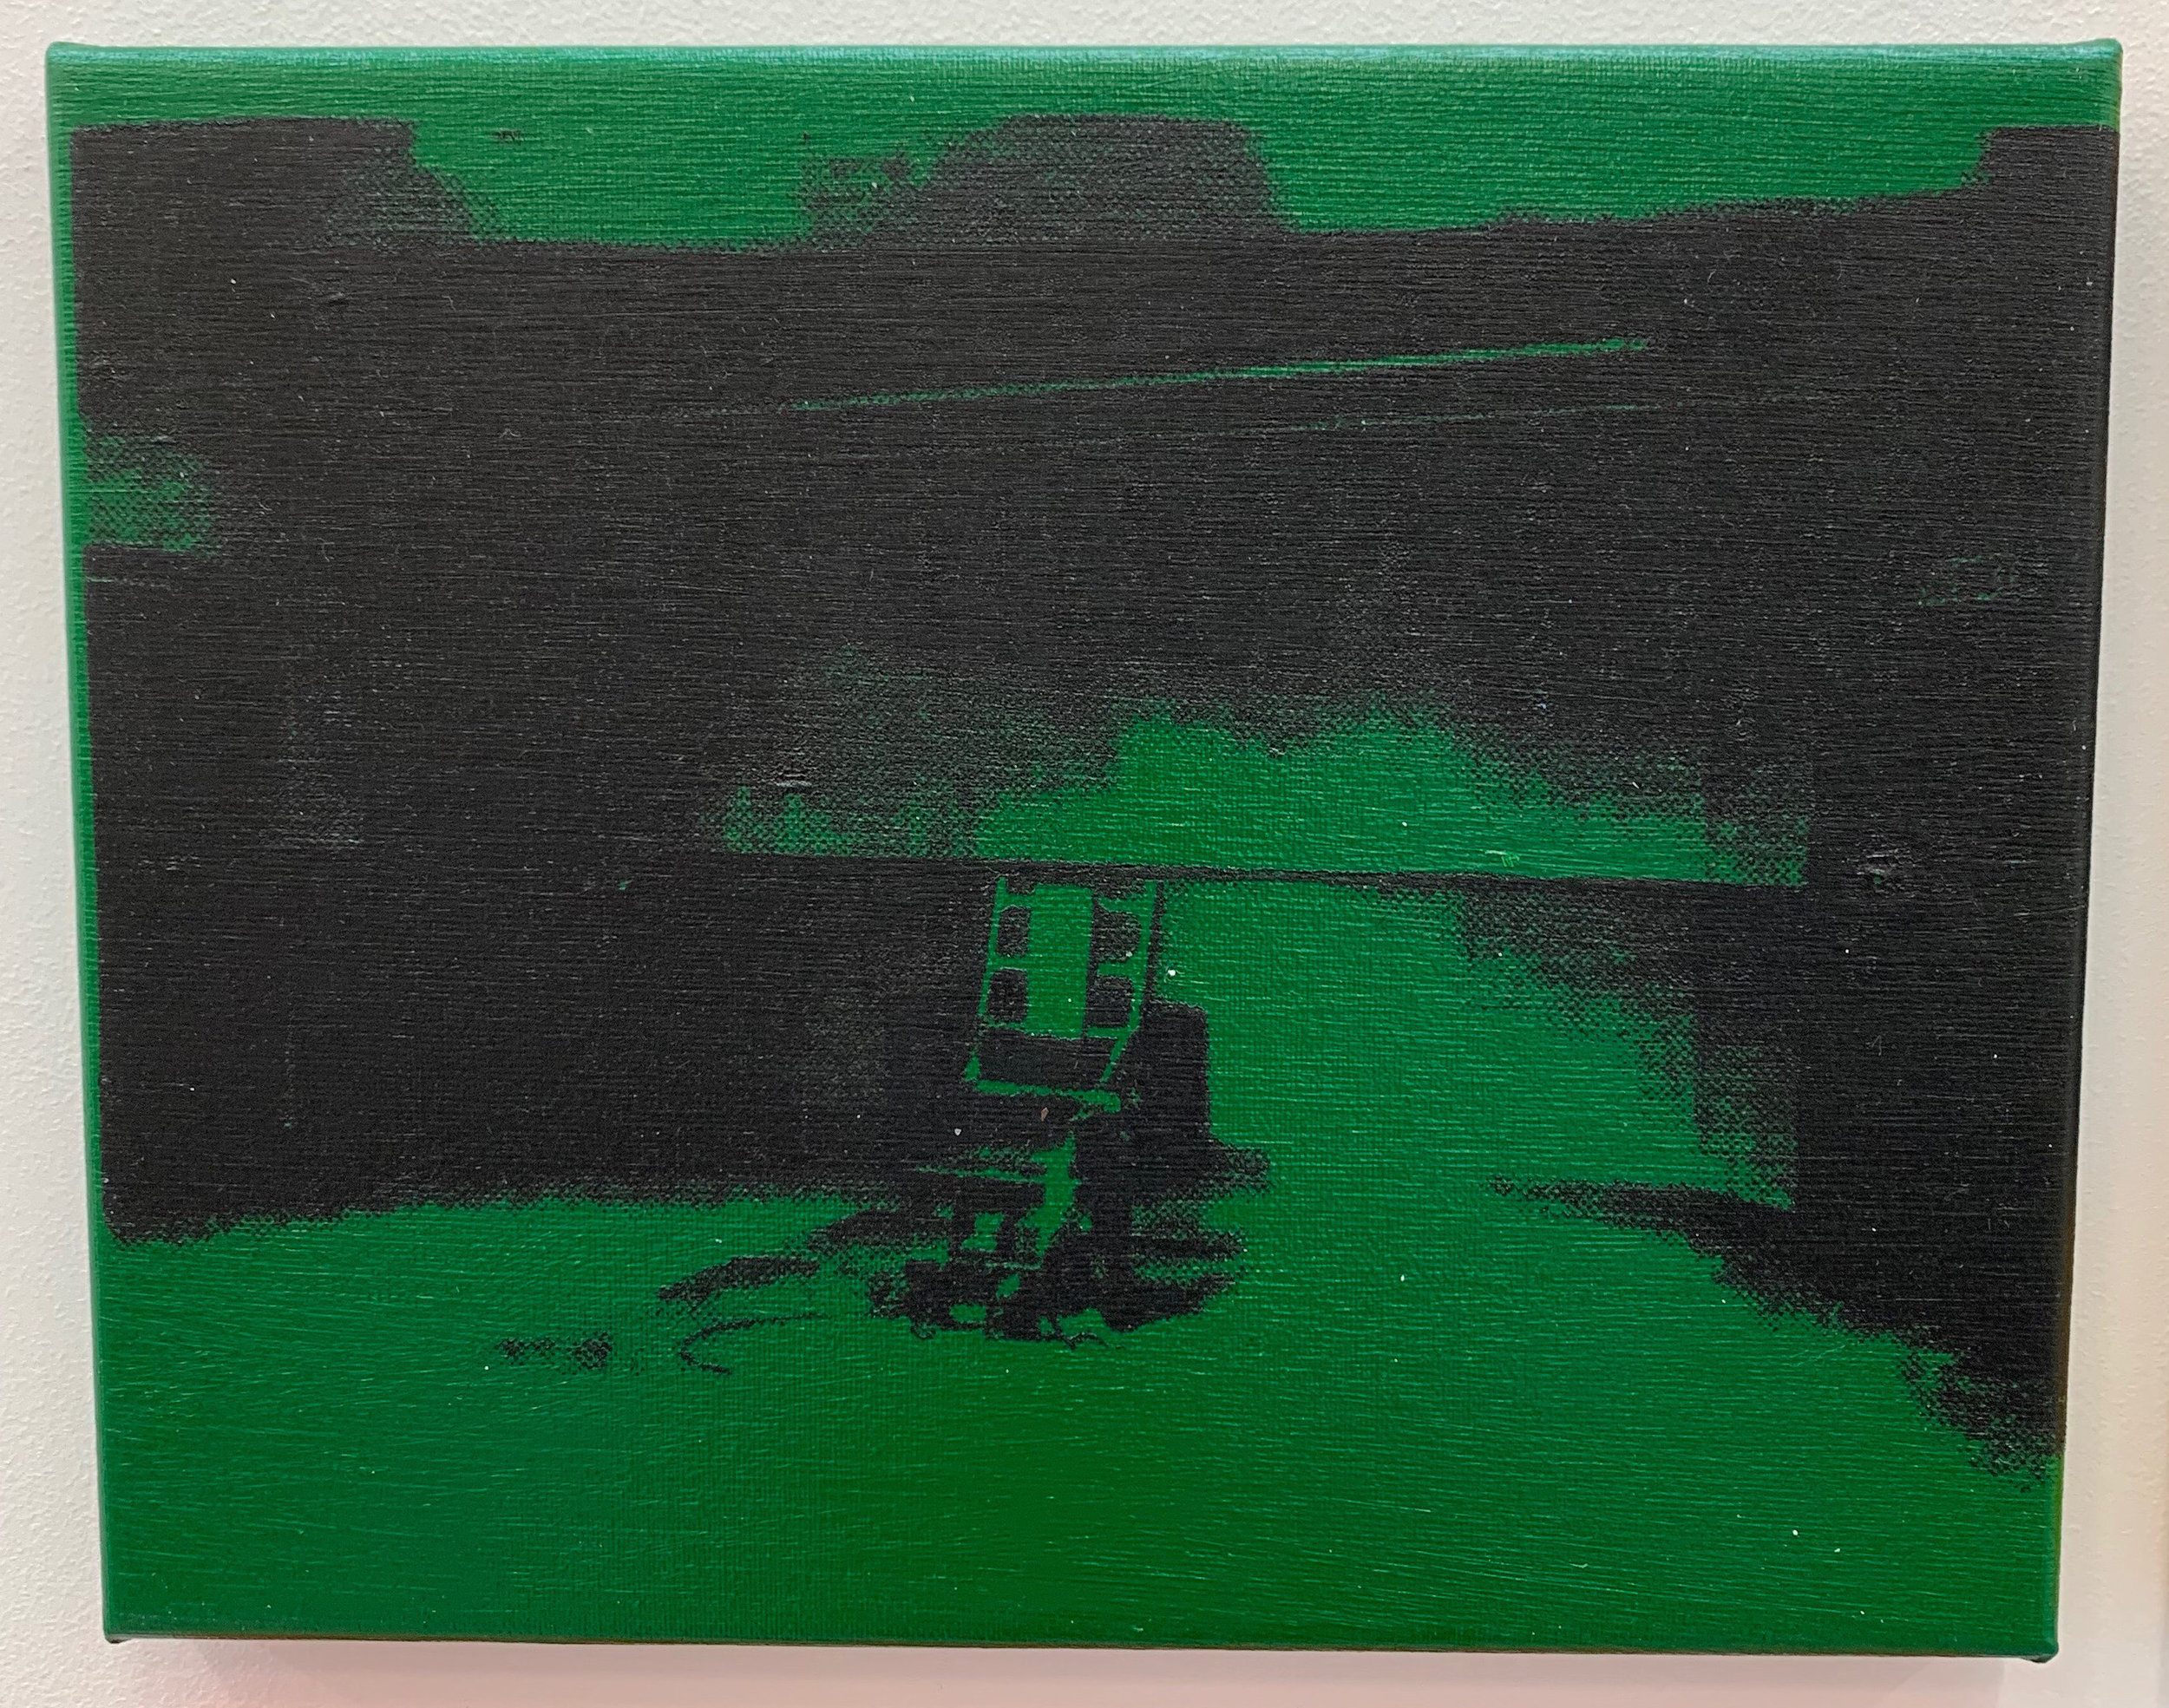 Andy Warhol (Electric Chair, Green), 2019,  Acrylic and silkscreen ink on canvas,  8 x 10 inches,  20.3 x 25.4 cm